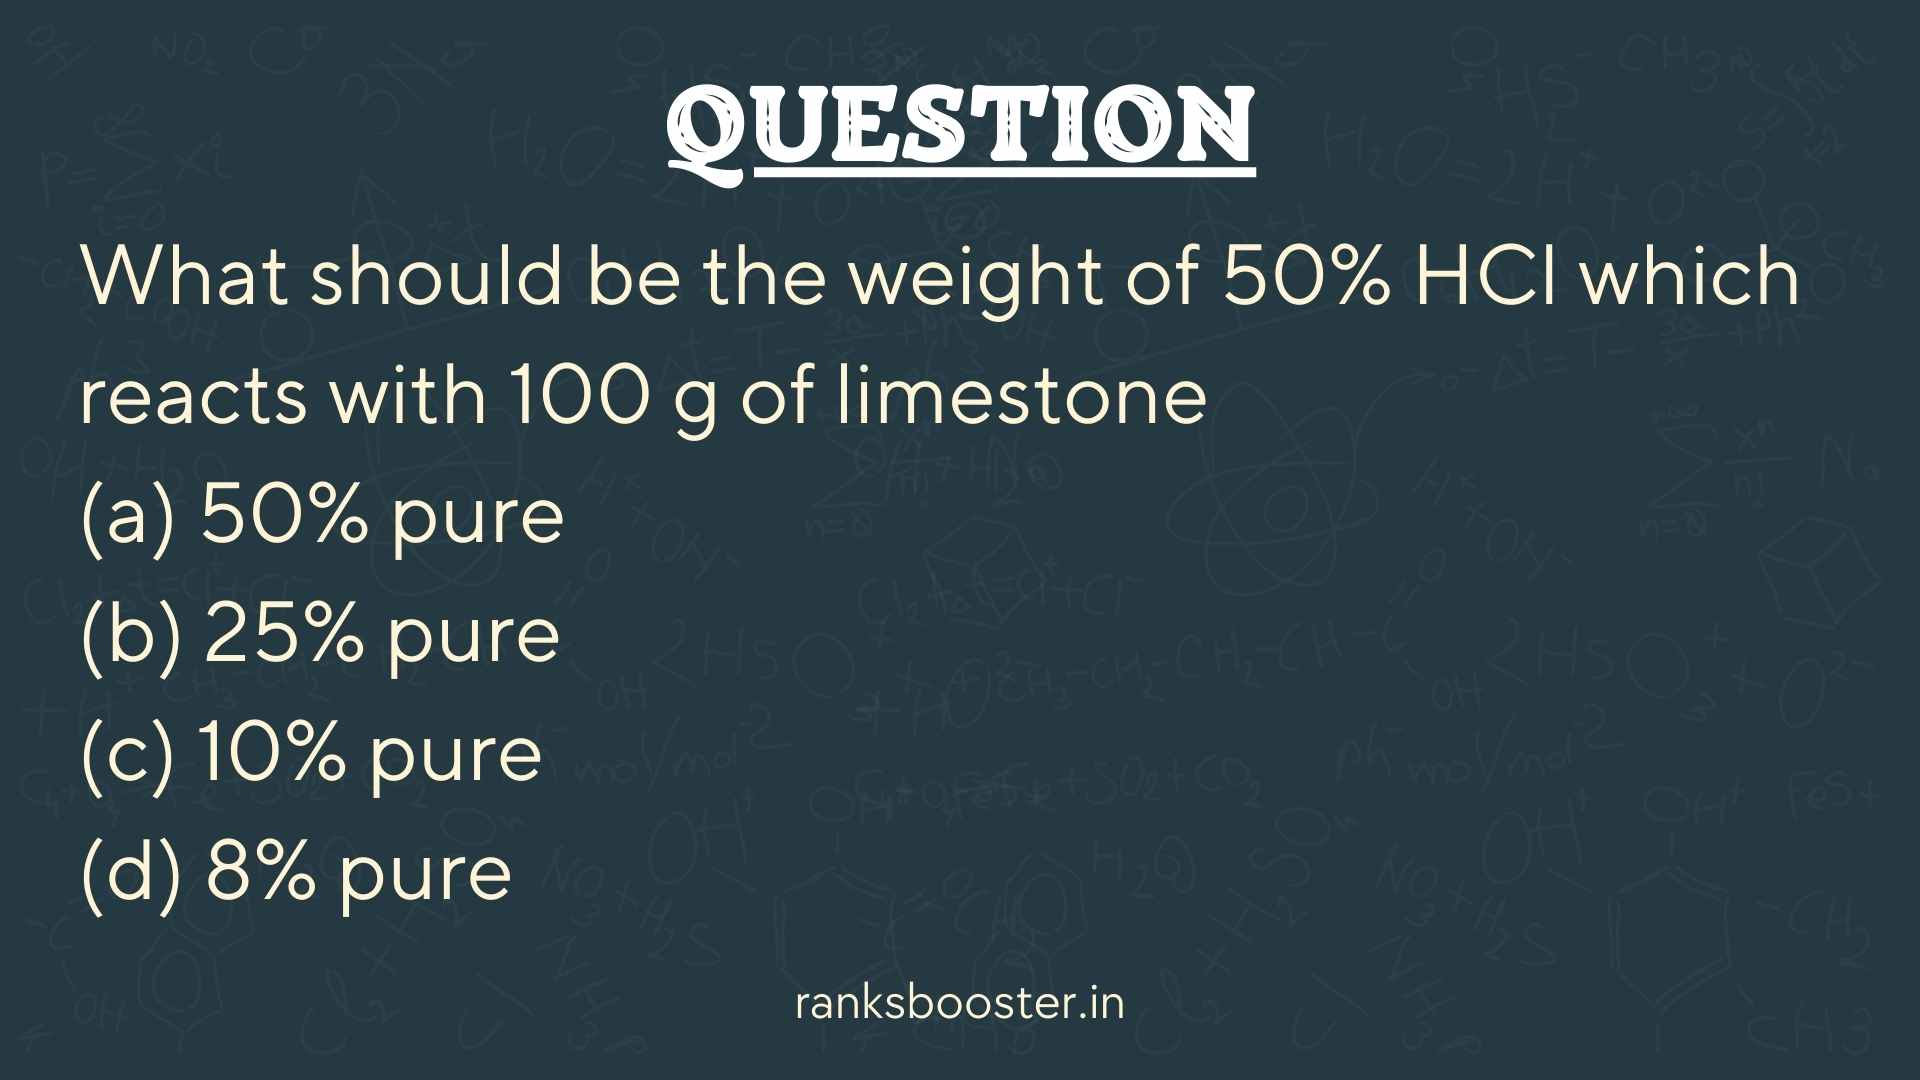 Question: What should be the weight of 50% HCl which reacts with 100 g of limestone (a) 50% pure (b) 25% pure (c) 10% pure (d) 8% pure